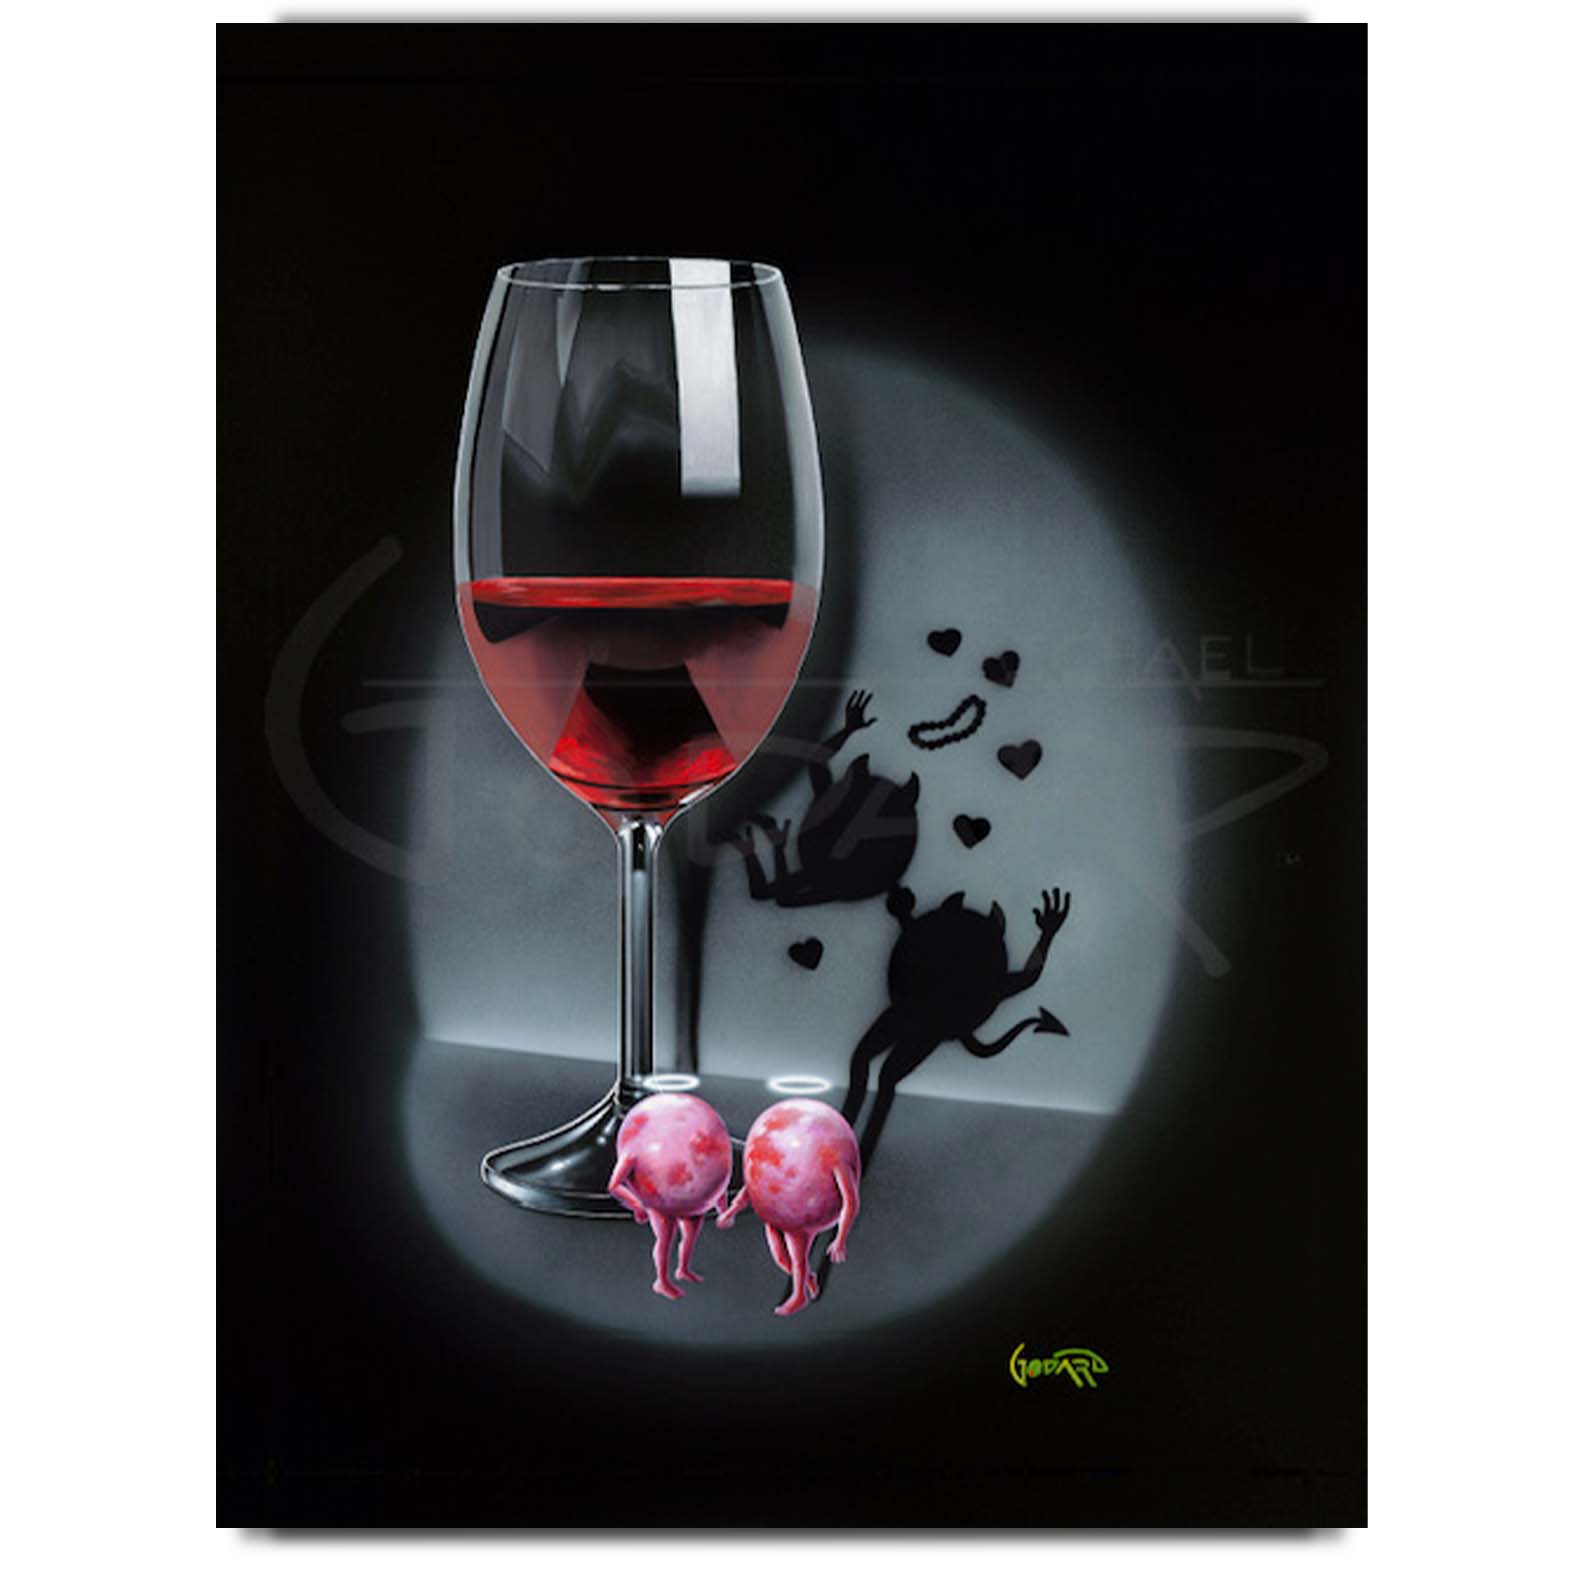 Michael Godard "First Date Red Wine" Limited Edition Canvas Giclee